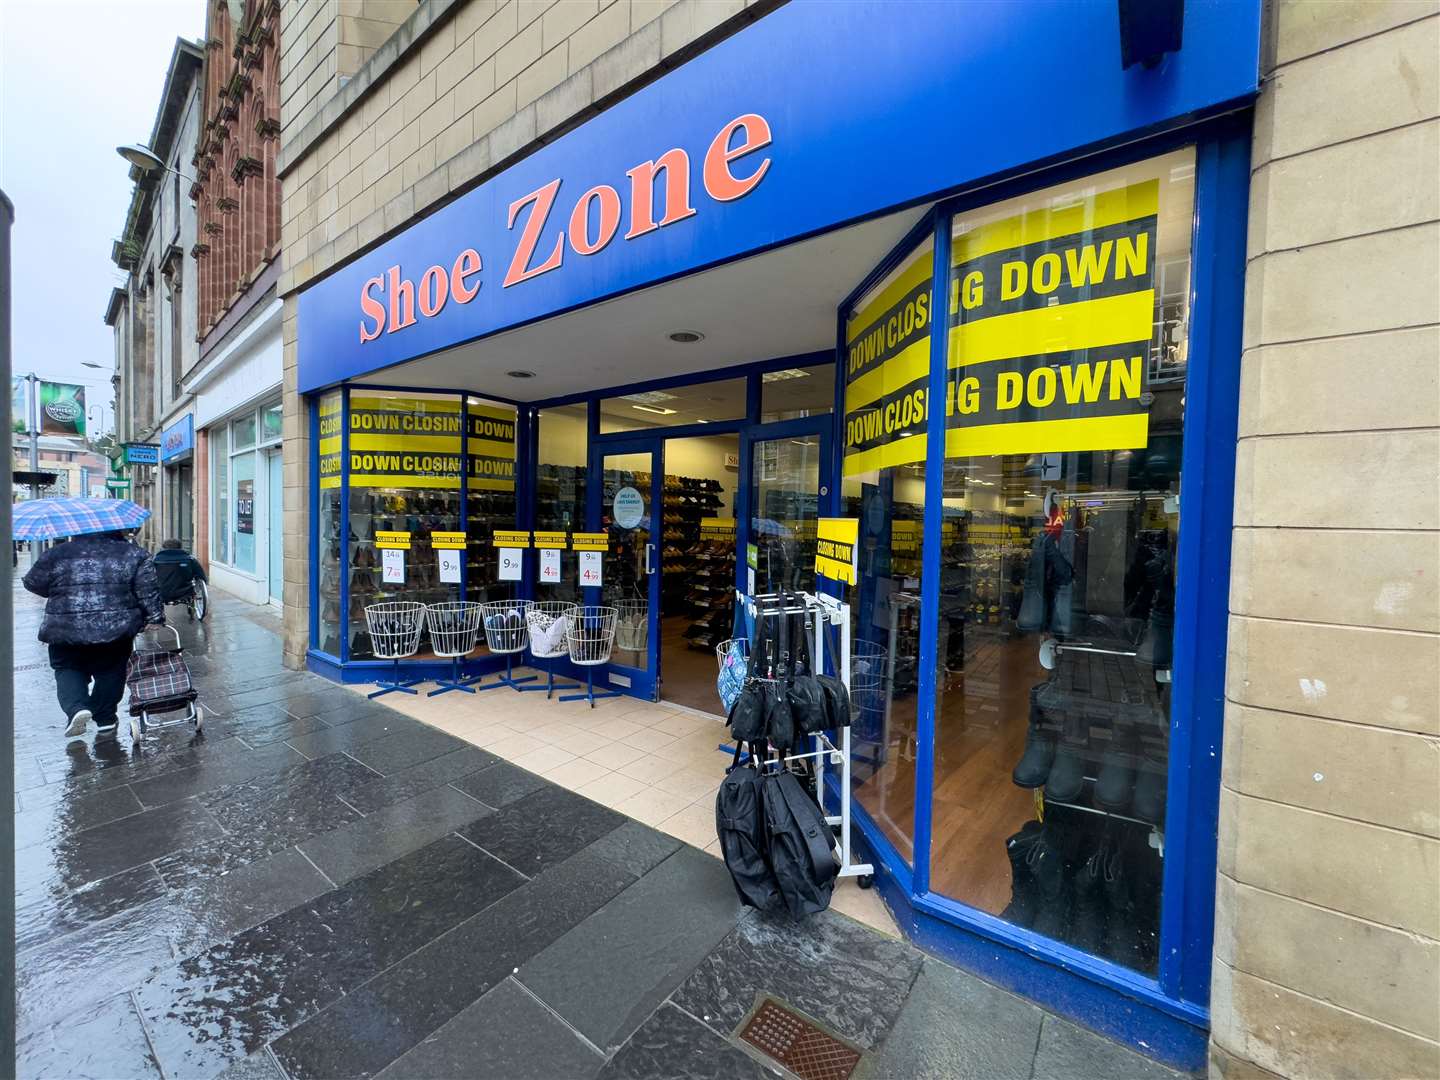 Closing down signs have appeared at Shoe Zone in High Street, Inverness.